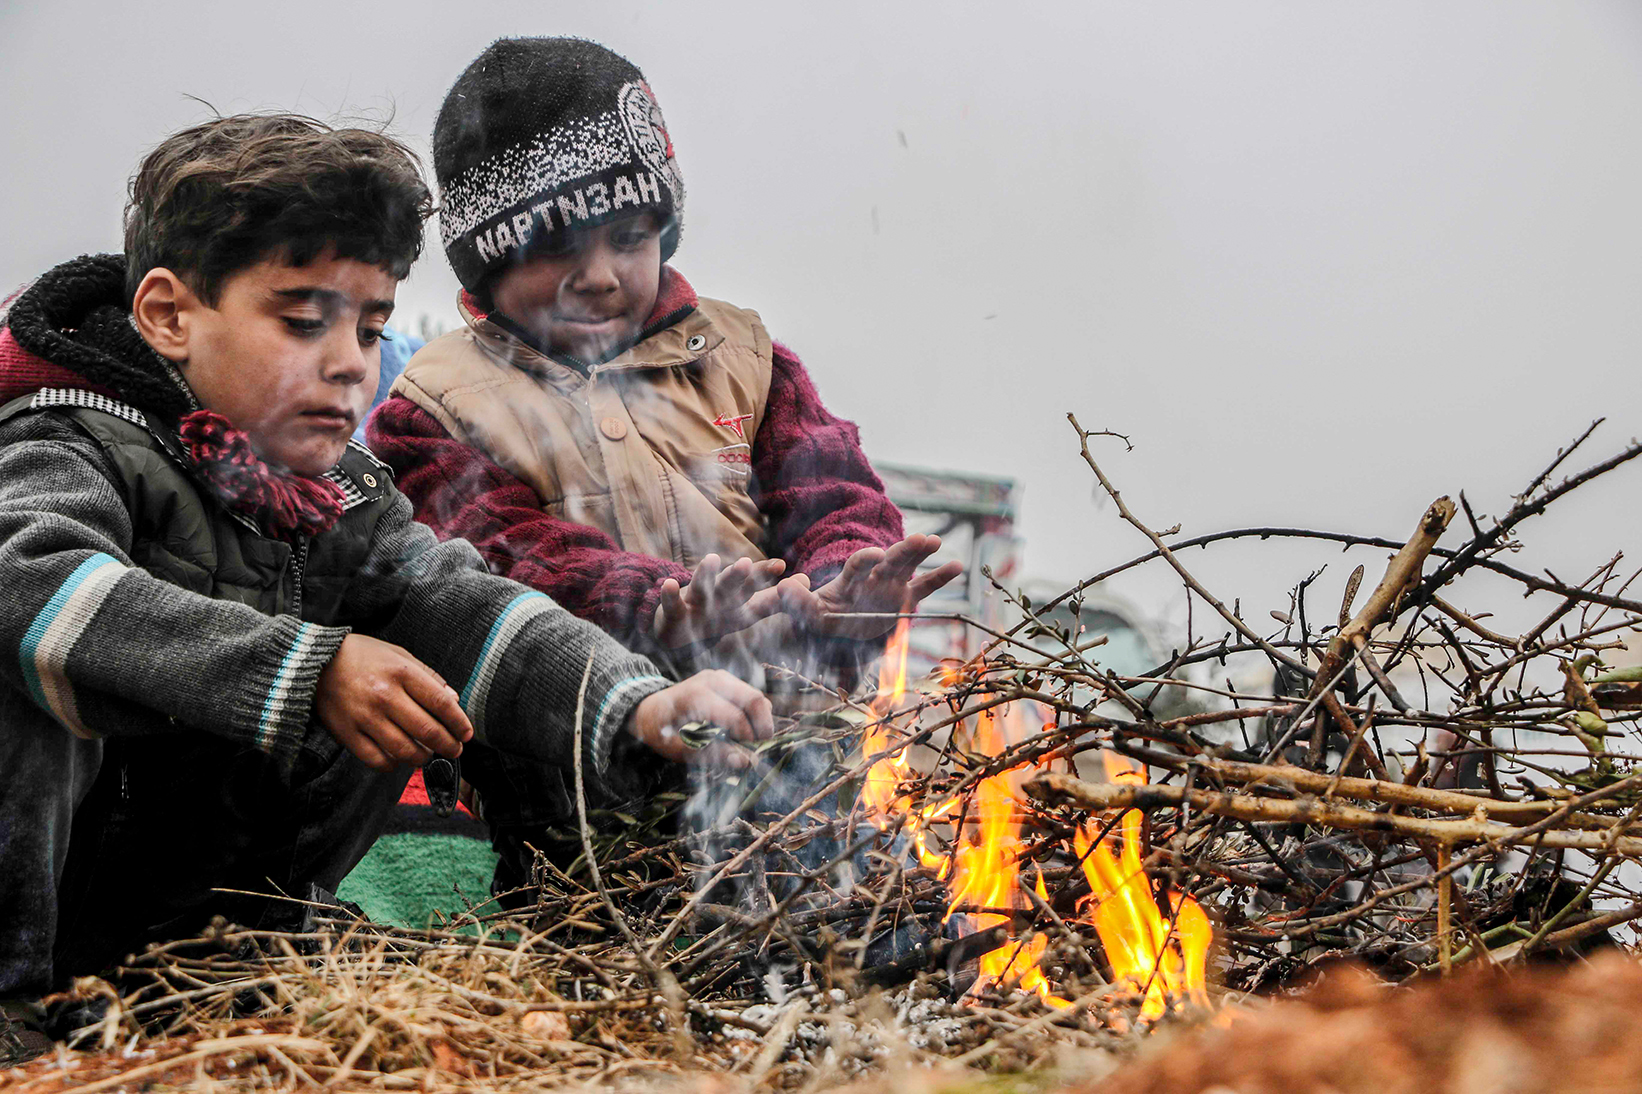 young Syrian children warming themselves over a fire